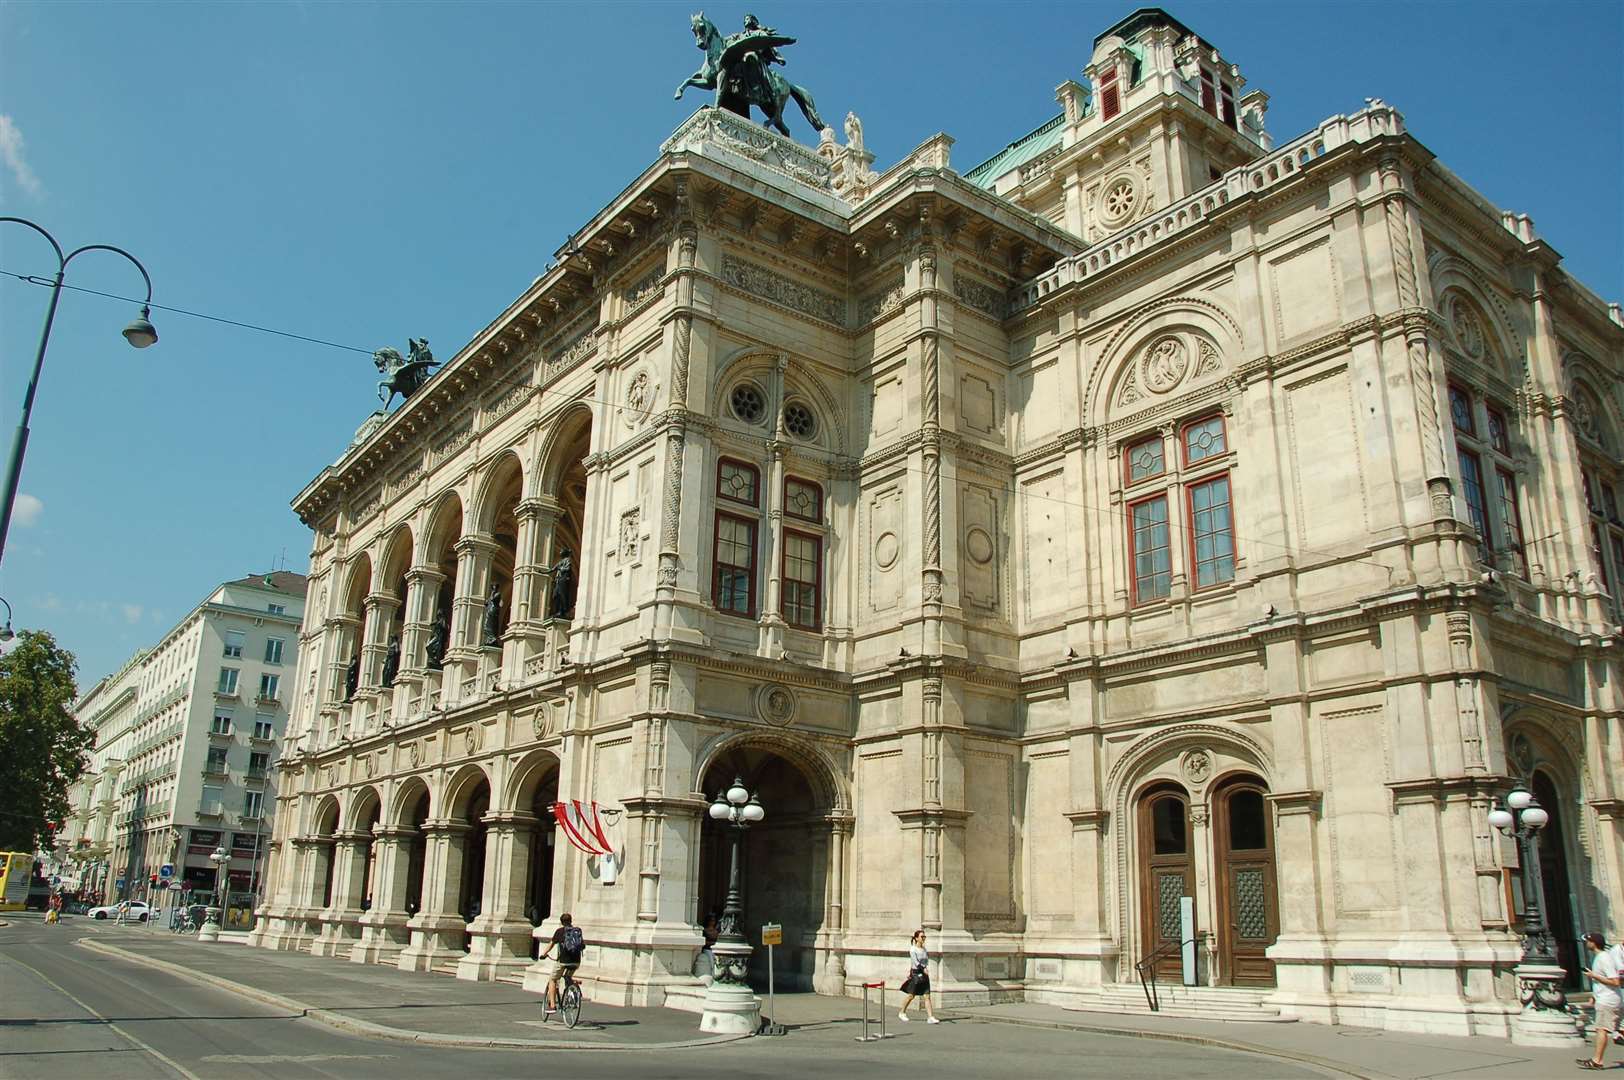 The massive Opera House on the Ringstrasse.